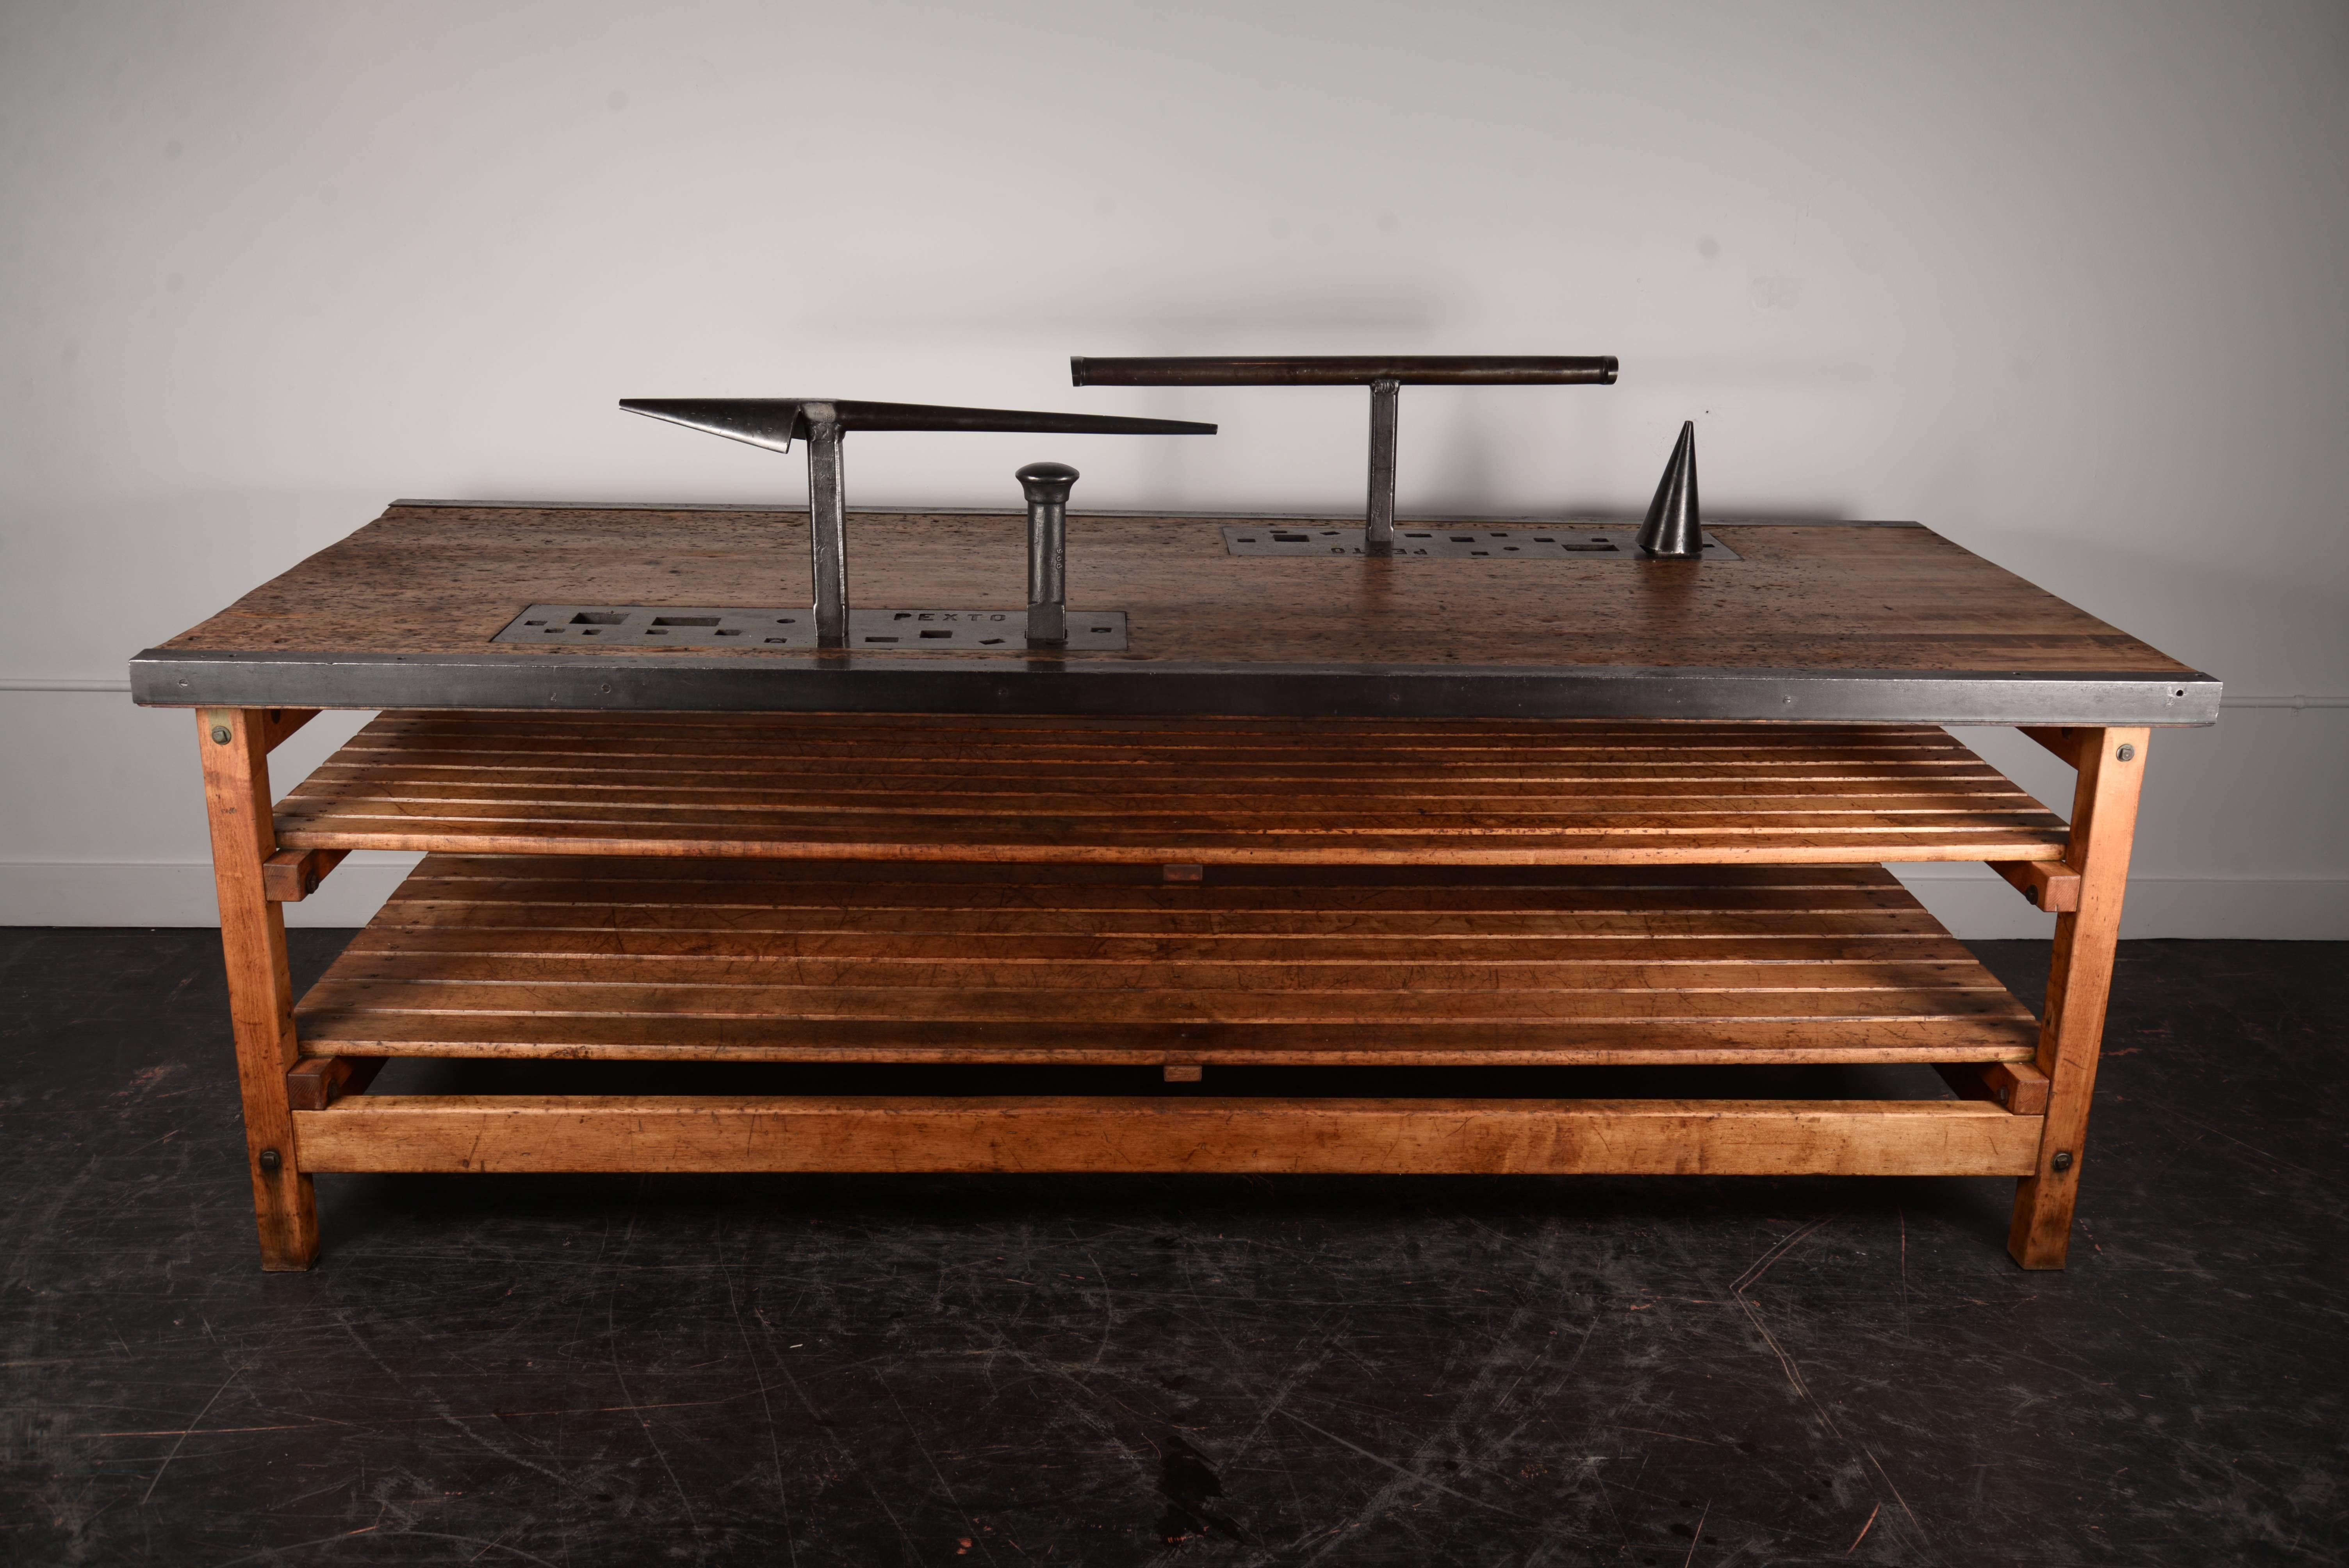 Double-sided training workstation table for blacksmithing. This is constructed out of maple and steel and has been thoroughly cleaned and waxed. A set of original shaping tools come with this table.